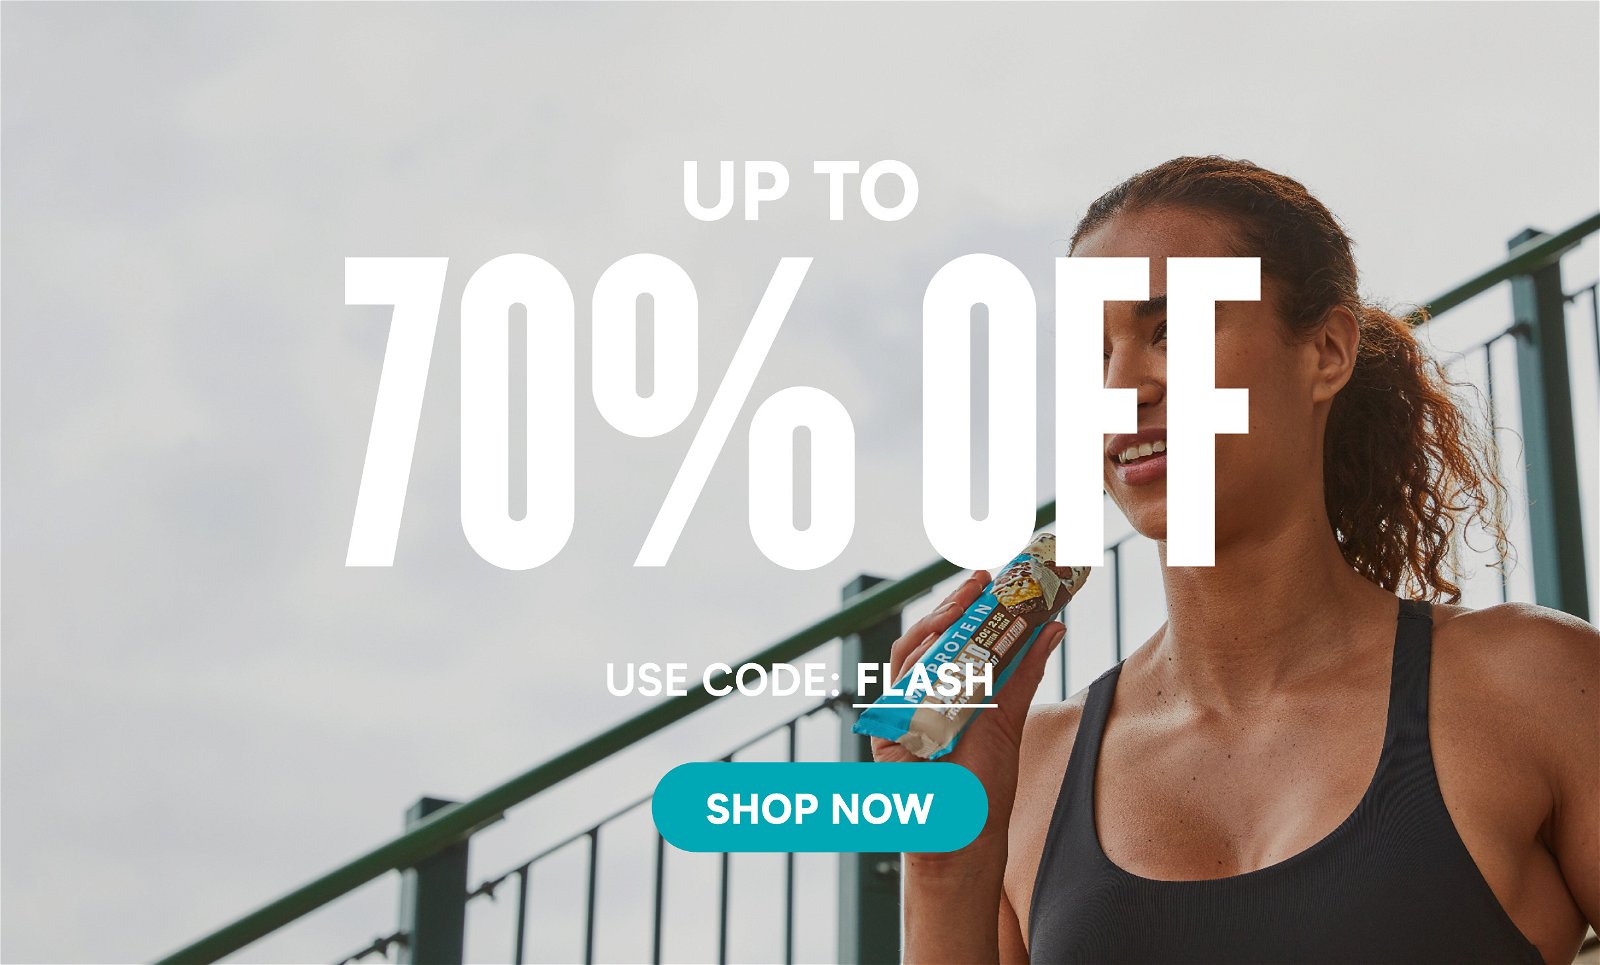 Flash sale up to 70% off